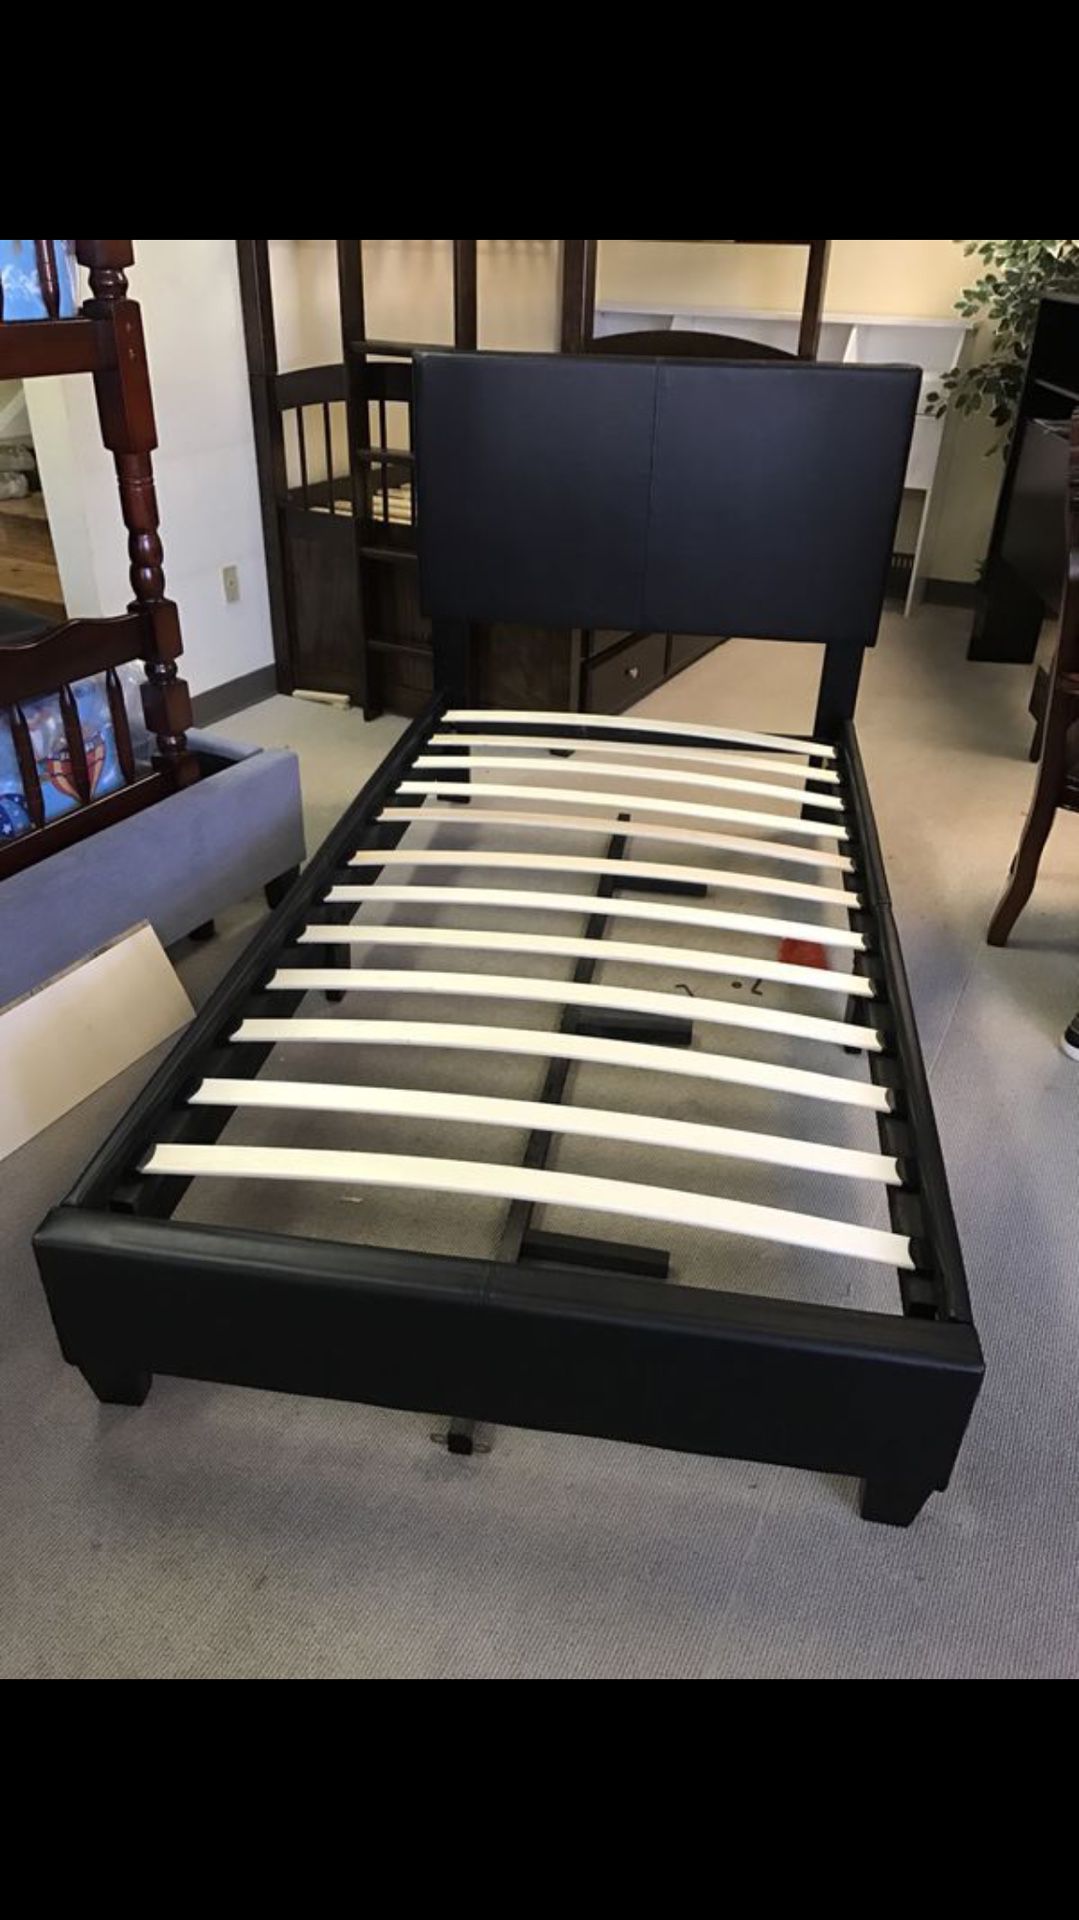 Brand new twin size bed frame 1 pc